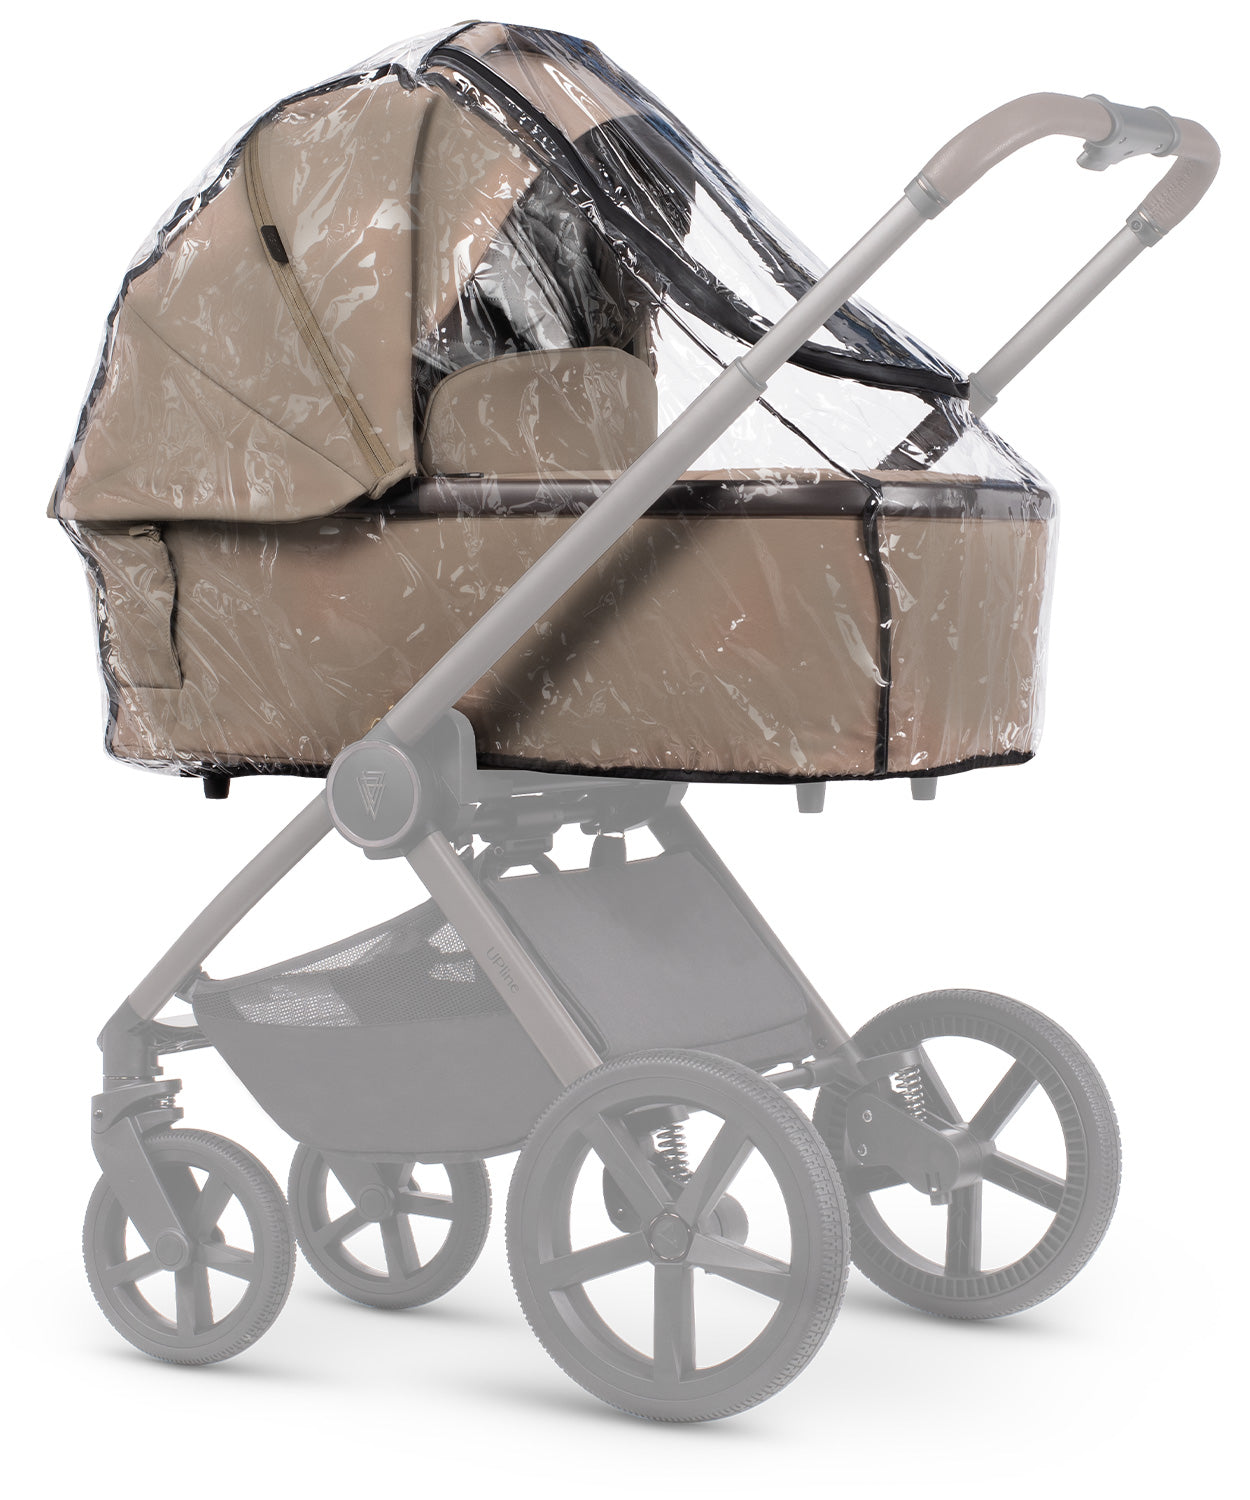 Venicci Tinum Upline SE 3 In 1 Travel System - Powder -  | For Your Little One